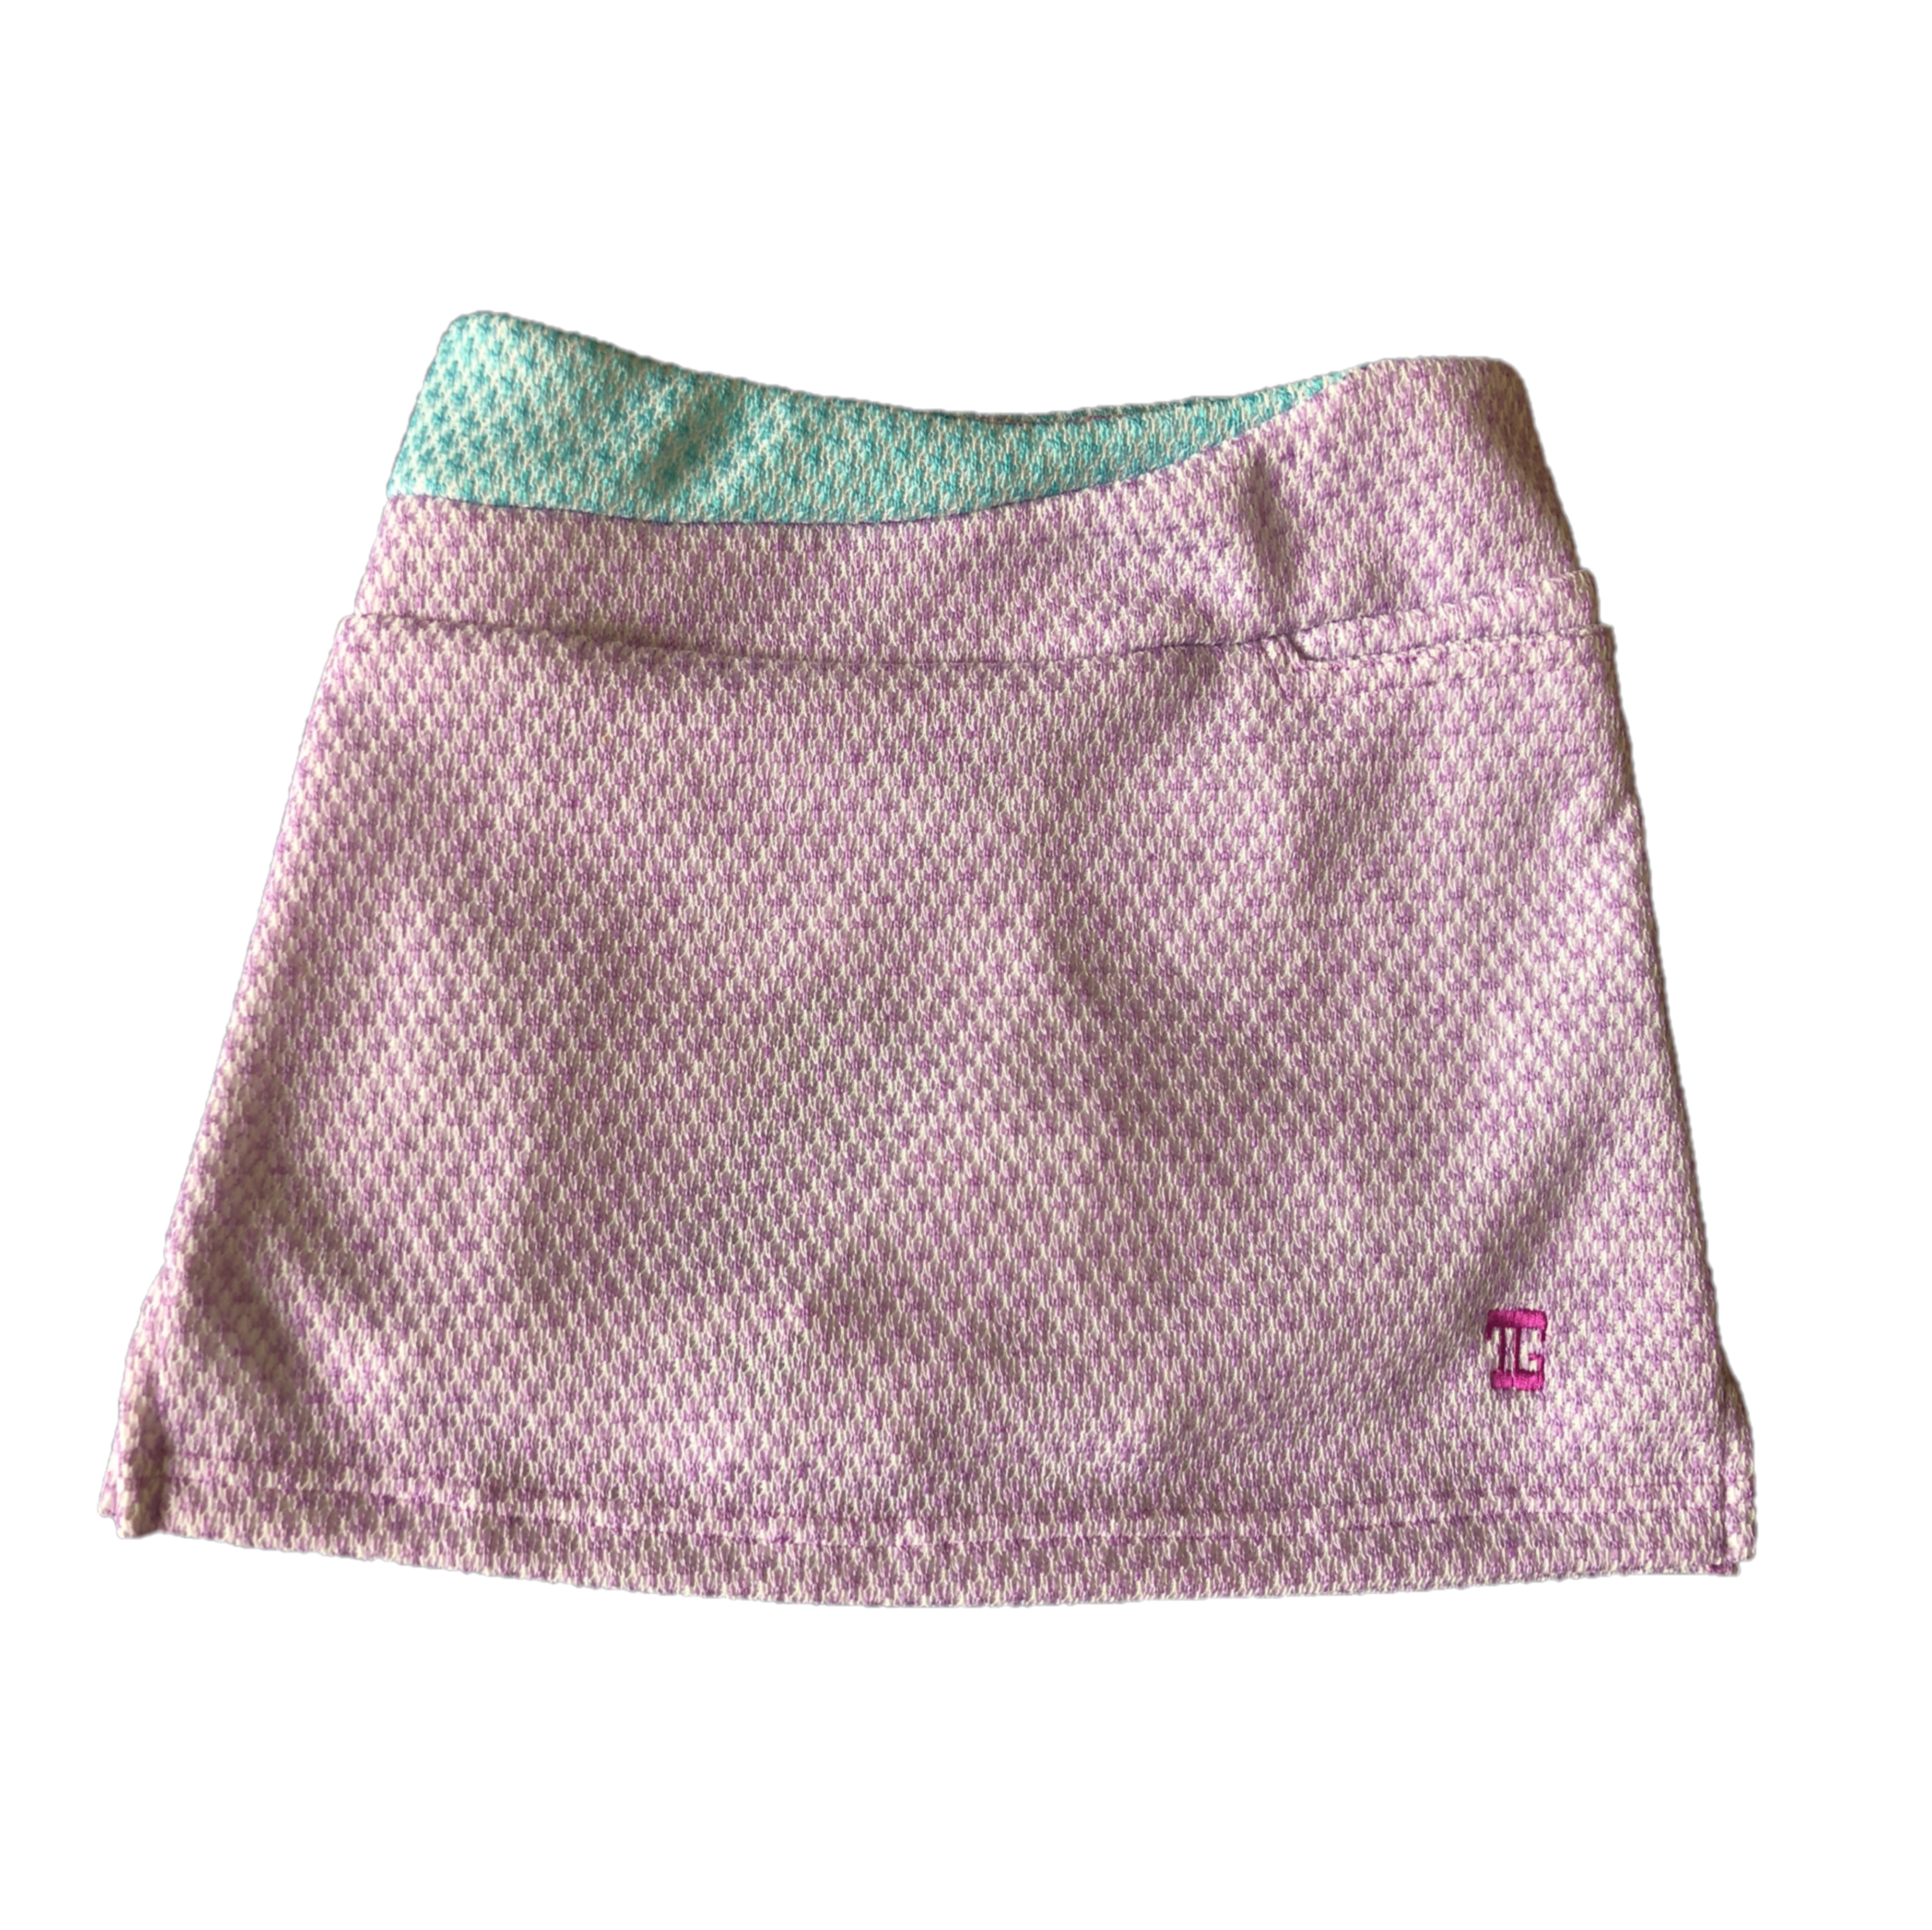 LS-062C || Skirt  Light Purple Houndstooth Motif with  Pale Blue Star Textured Fabric  1/2 Waist Band and  One Front and 2 Rear Pockets